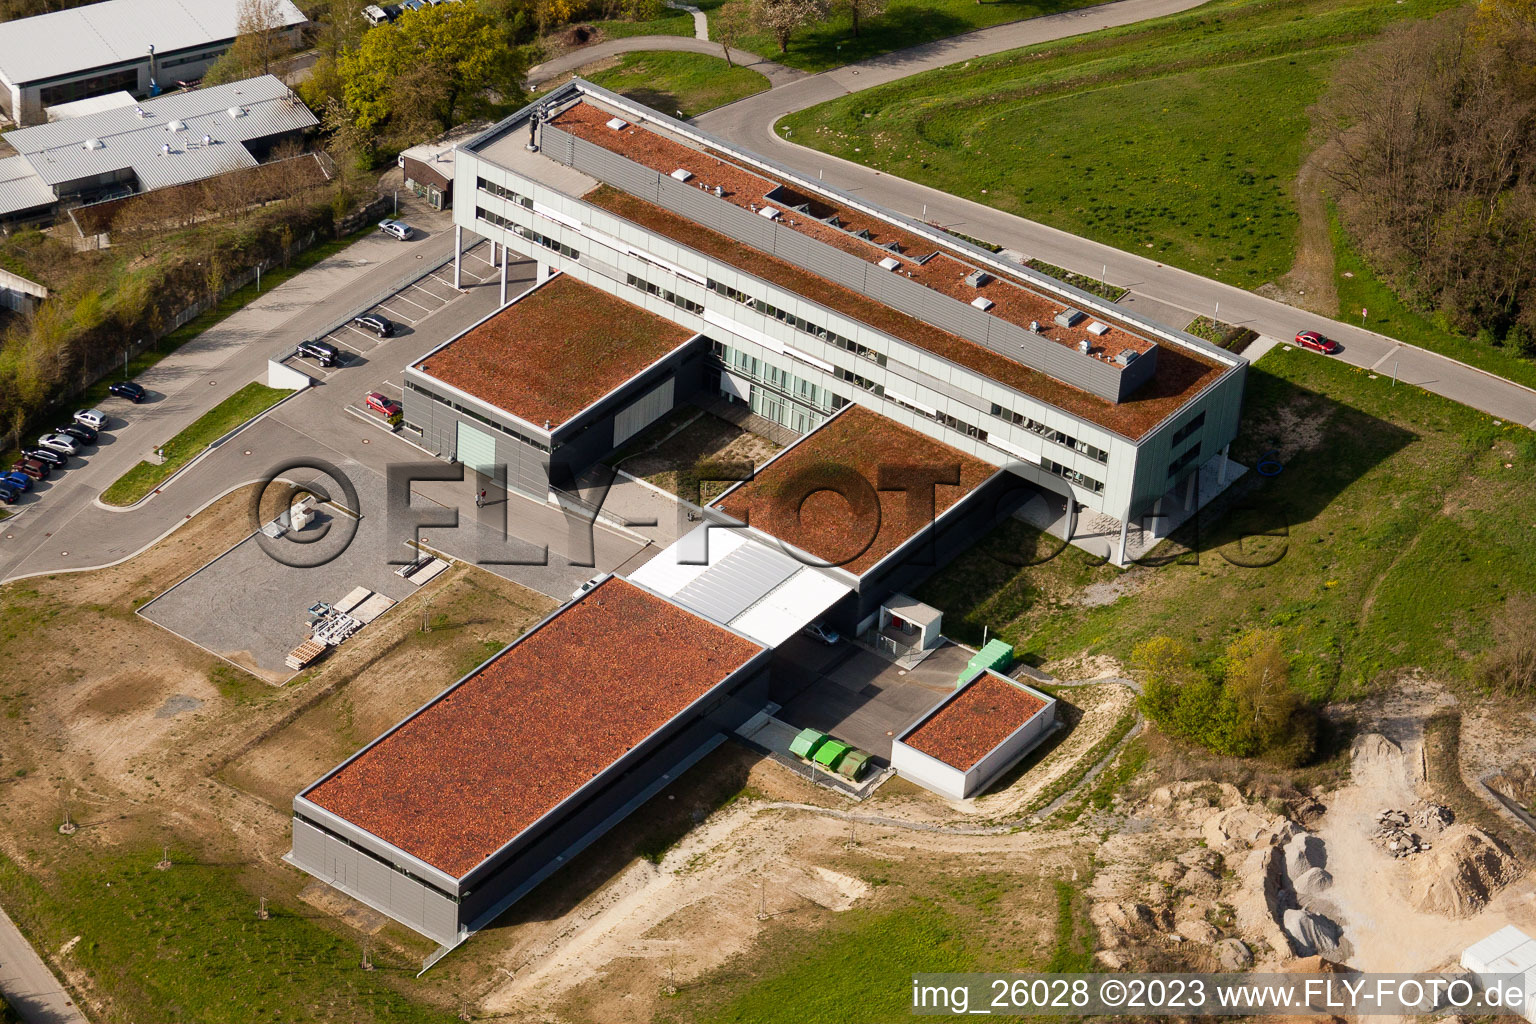 Bird's eye view of Pfinztal, Fraunhofer Institute for Chemical Technology (ICT) in the district Grötzingen in Karlsruhe in the state Baden-Wuerttemberg, Germany